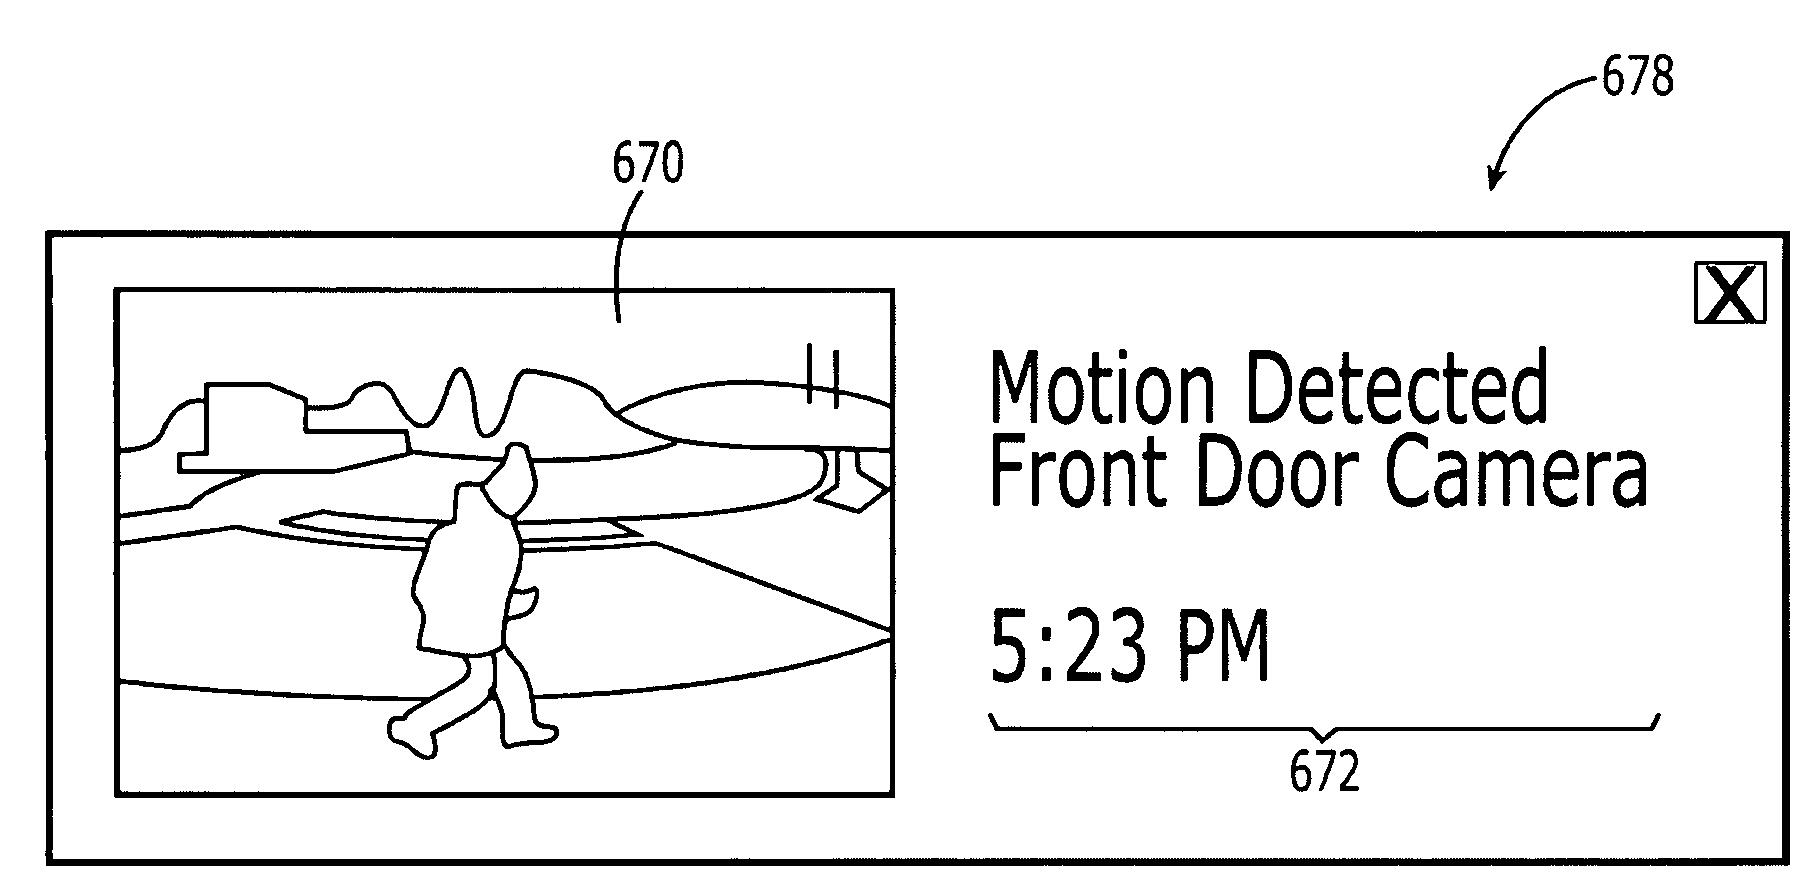 Systems and methods for user notification in a multi-use environment